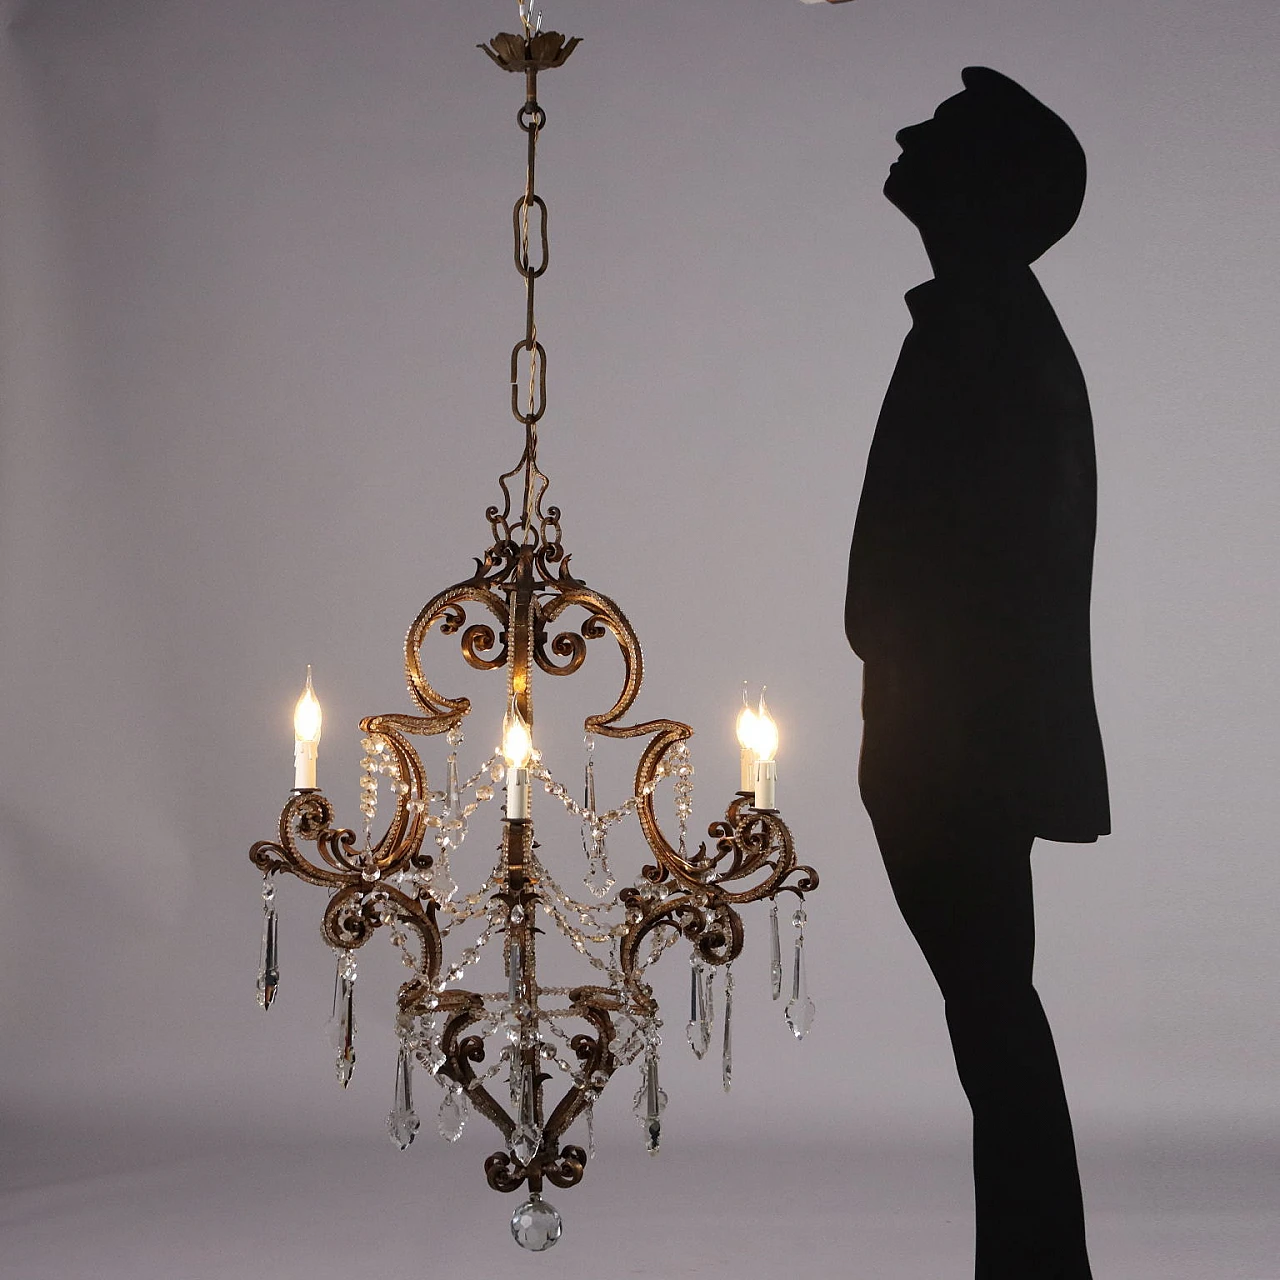 Six-light gilded wrought iron & glass chandelier, 19th century 2